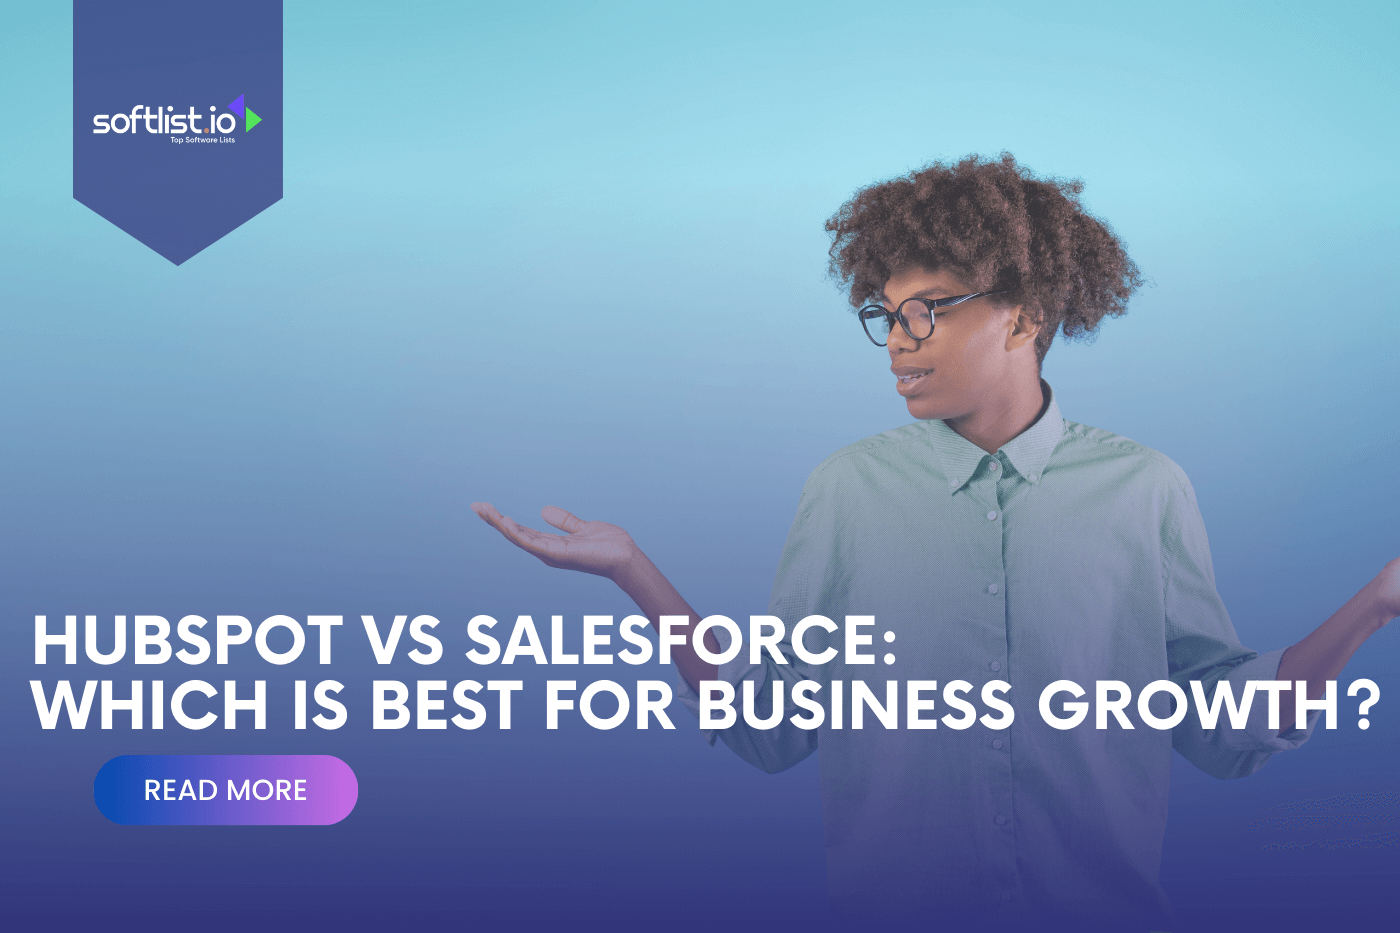 HubSpot vs Salesforce Which Is Best for Business Growth